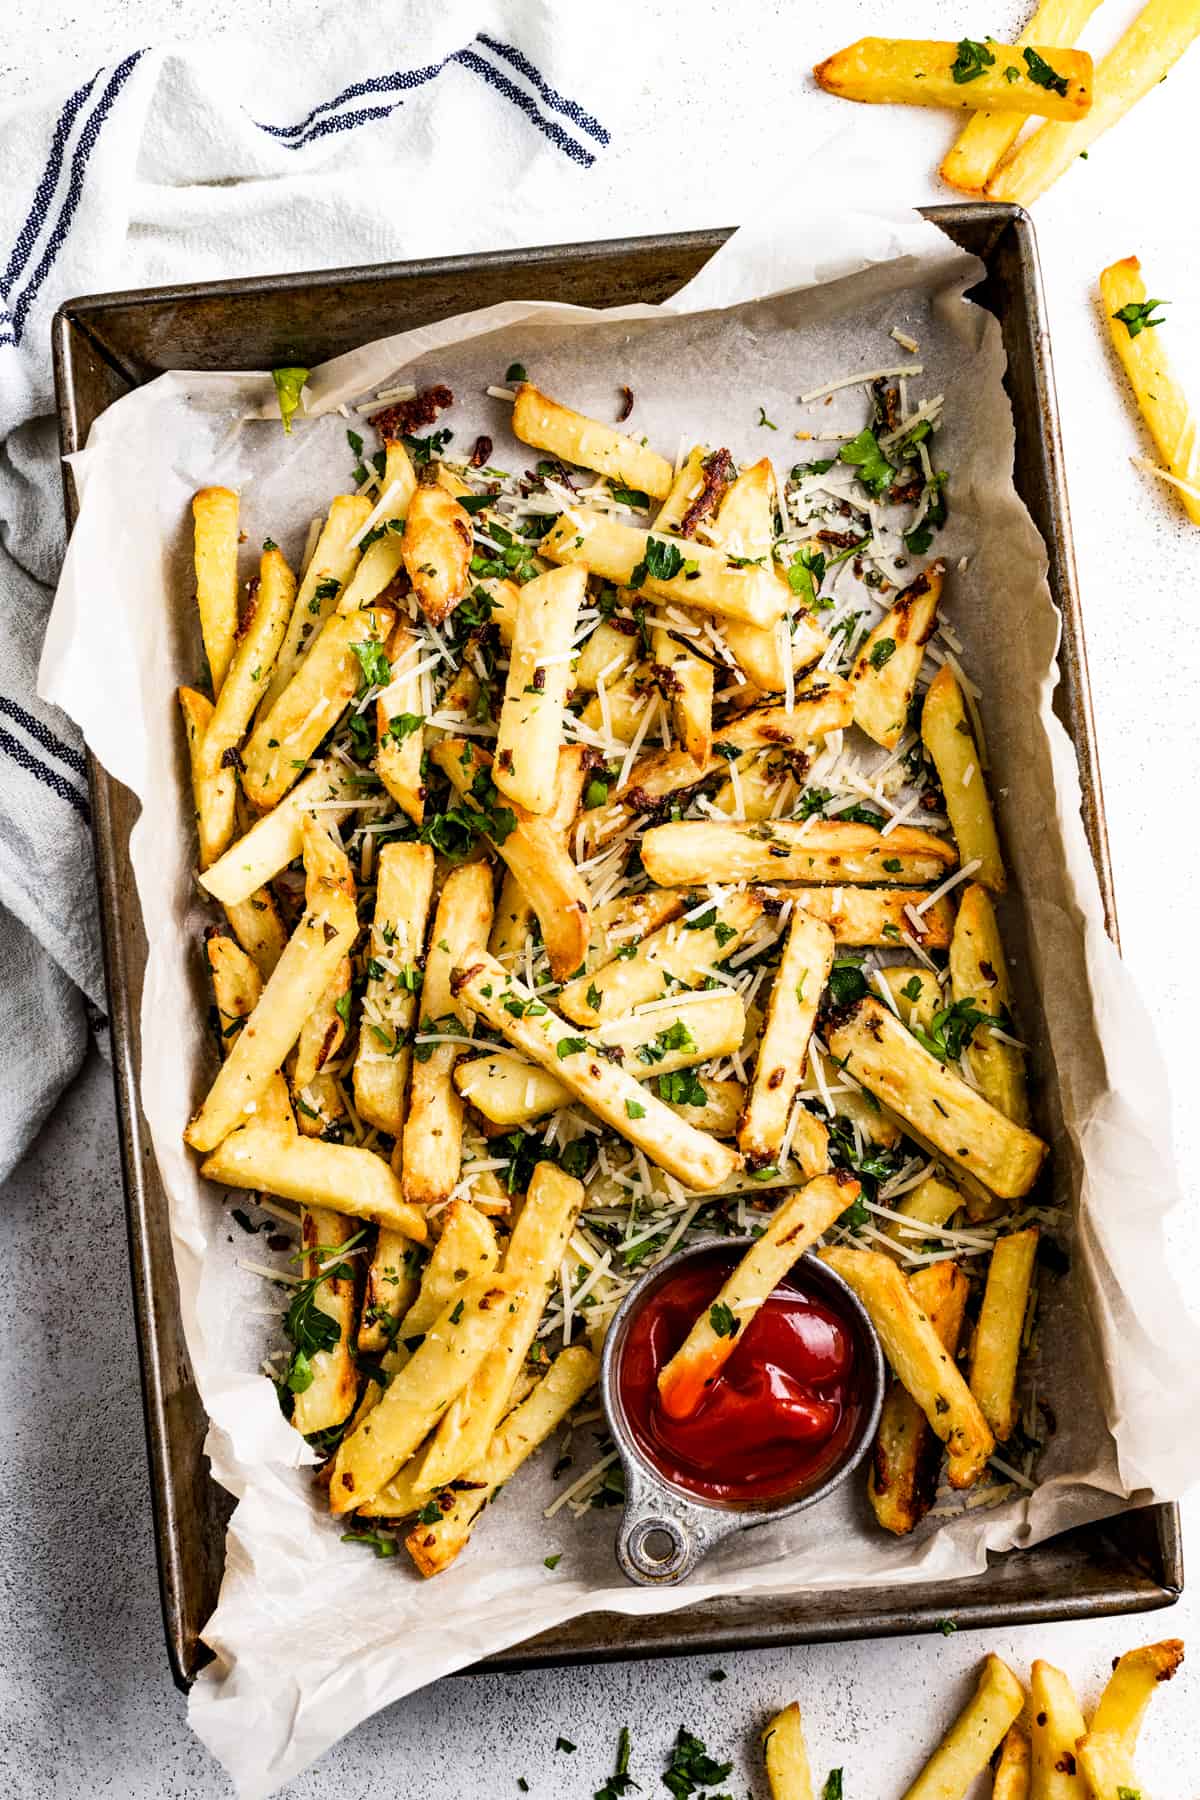 Truffle fries in a baking pan lined with parchment paper.